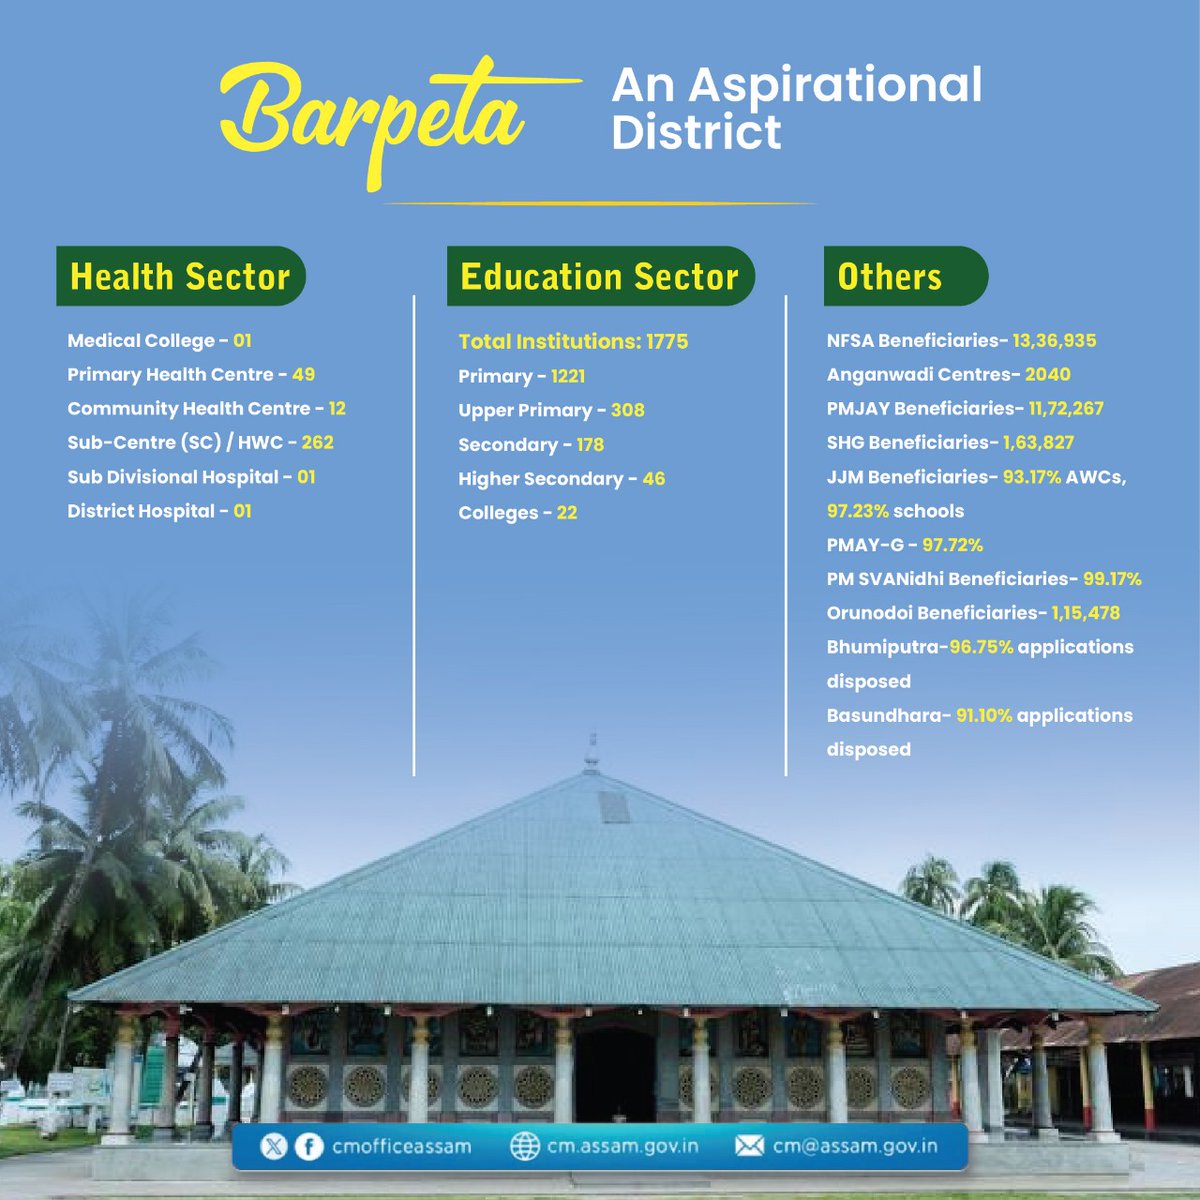 Barpeta has emerged as an aspirational district, making significant strides in its developmental pursuits under the progressive policies of the Assam Government. Here's a summary of the district's ongoing progress.